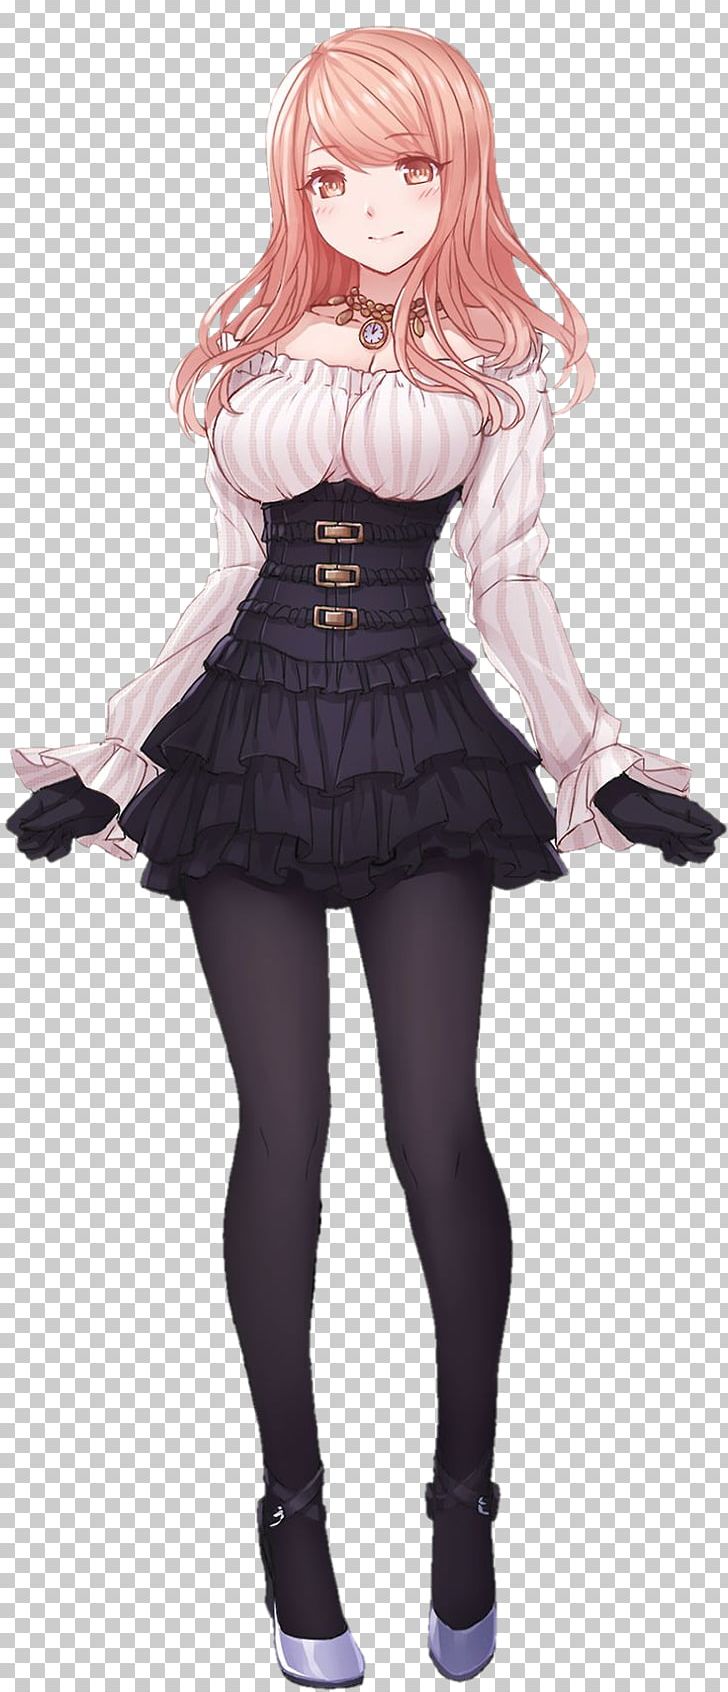 Gothic Fashion Skirt Dress Clothing PNG, Clipart, Anime, Balljointed Doll, Black Hair, Brown Hair, Clothing Free PNG Download